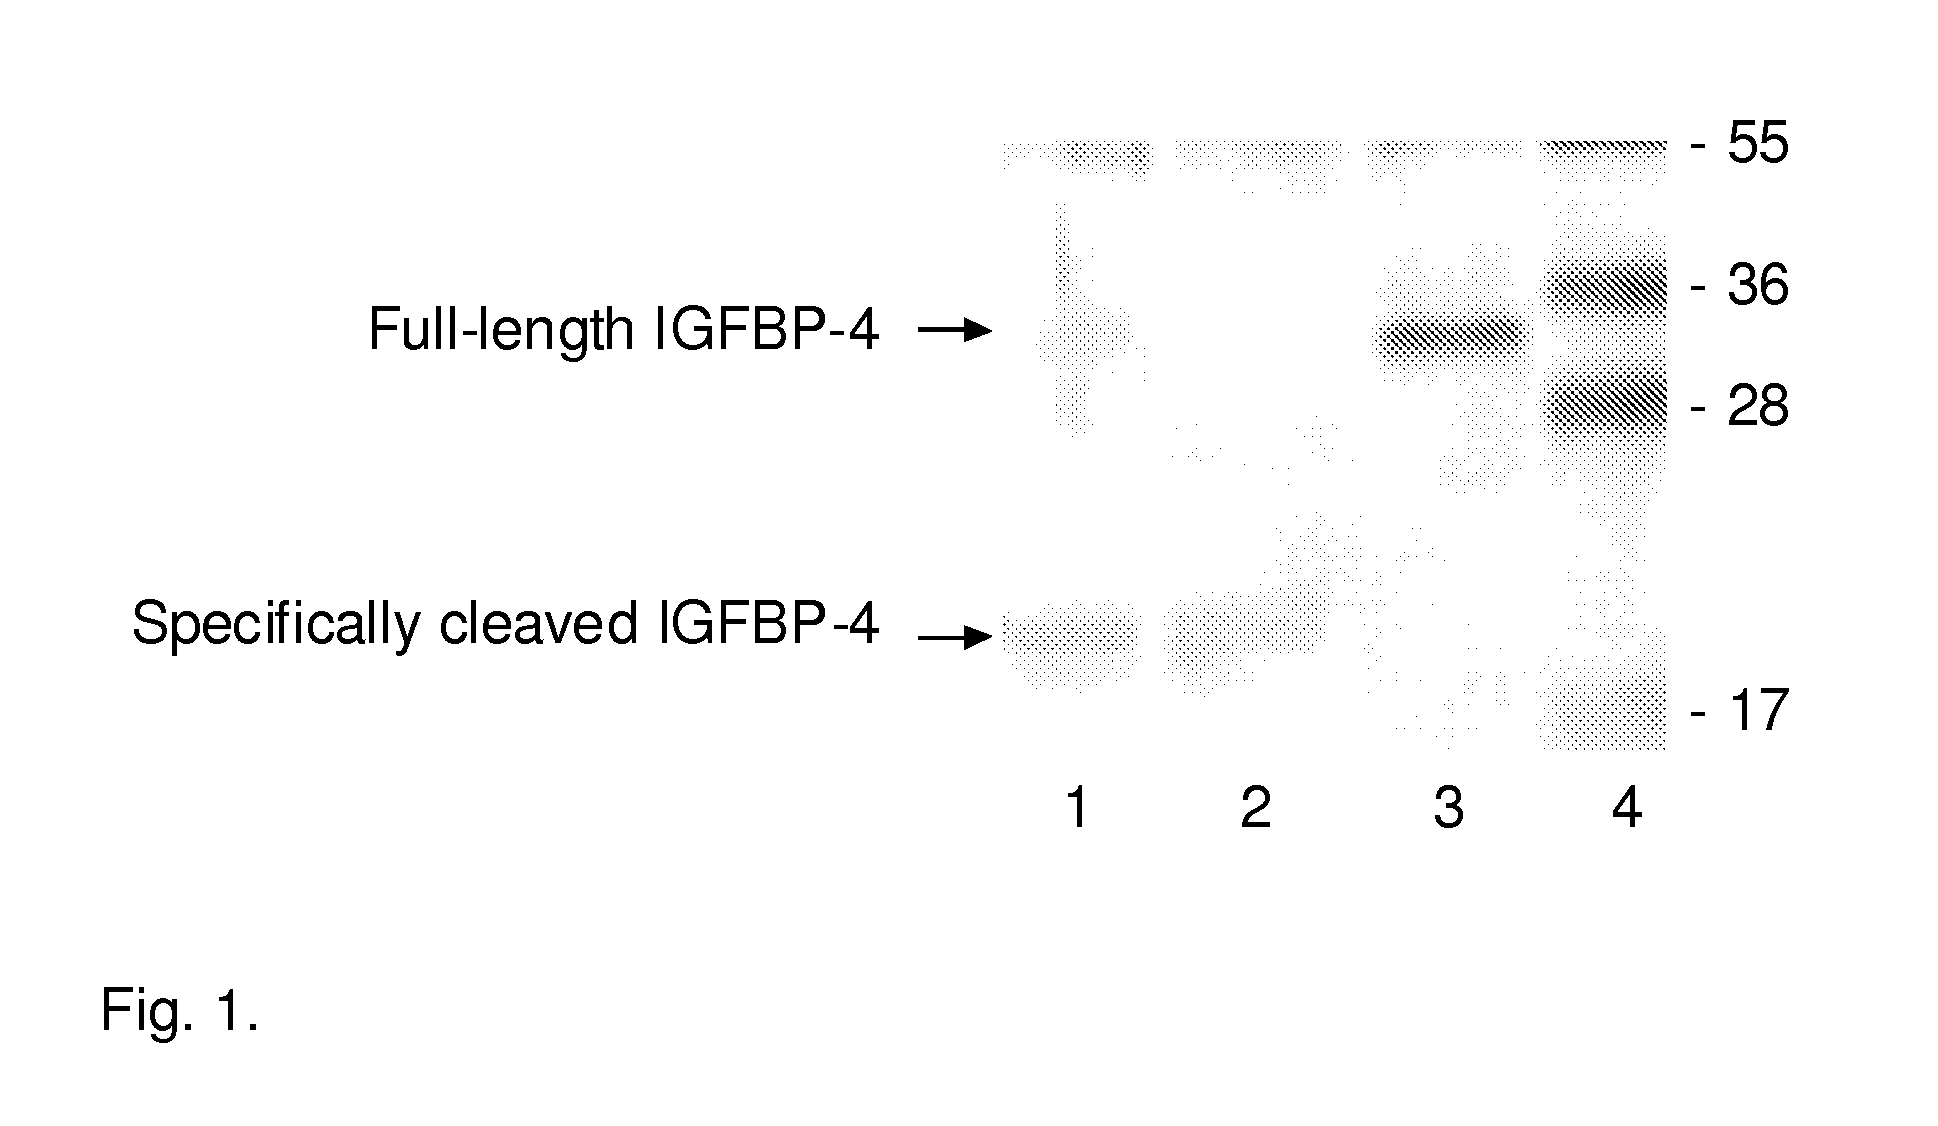 Diagnostic kit for IGFBP-4 proteolytic fragments in a patient sample